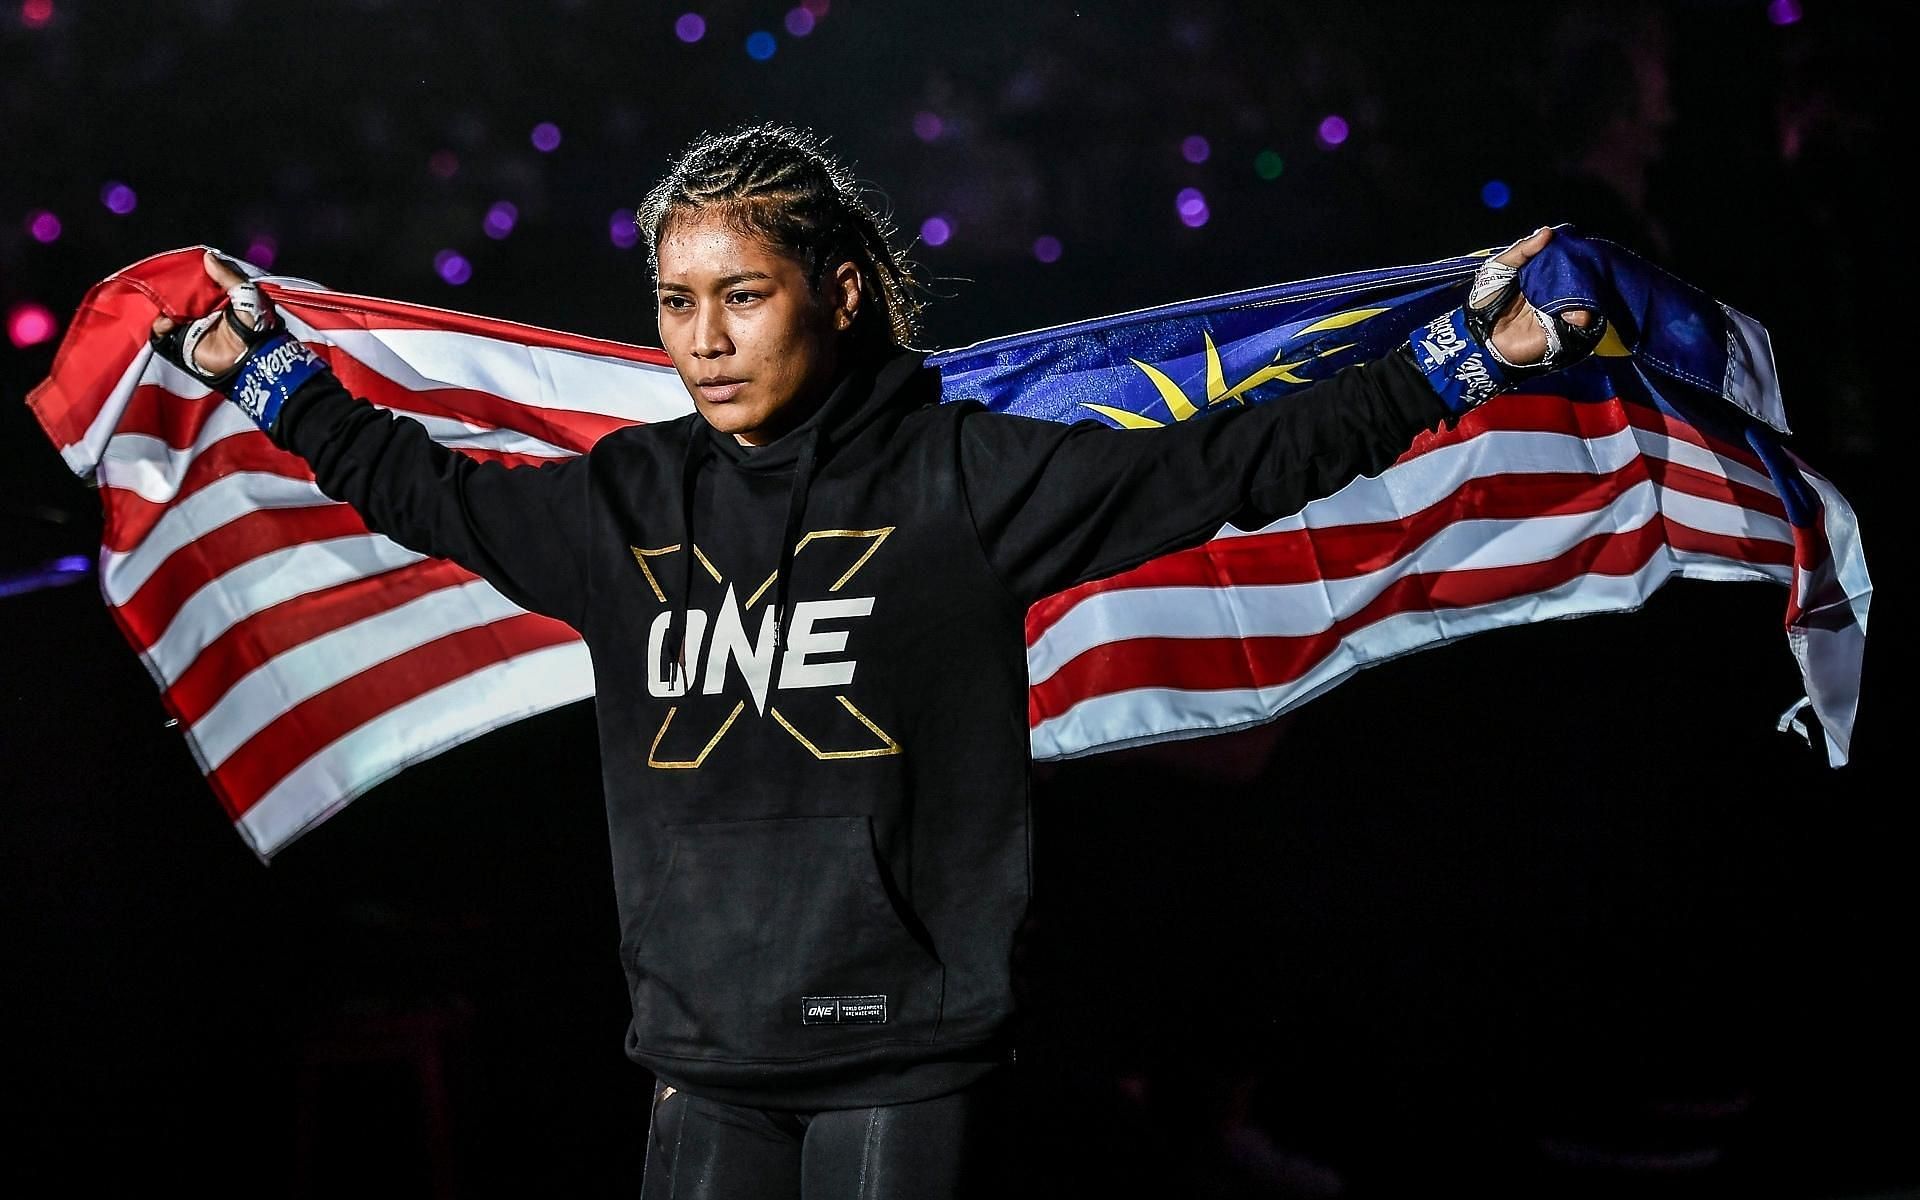 ONE Championship atomweight Jihin Radzuan wants to bring ONE Championship events back to Malaysia. (Image courtesy of ONE Championship)